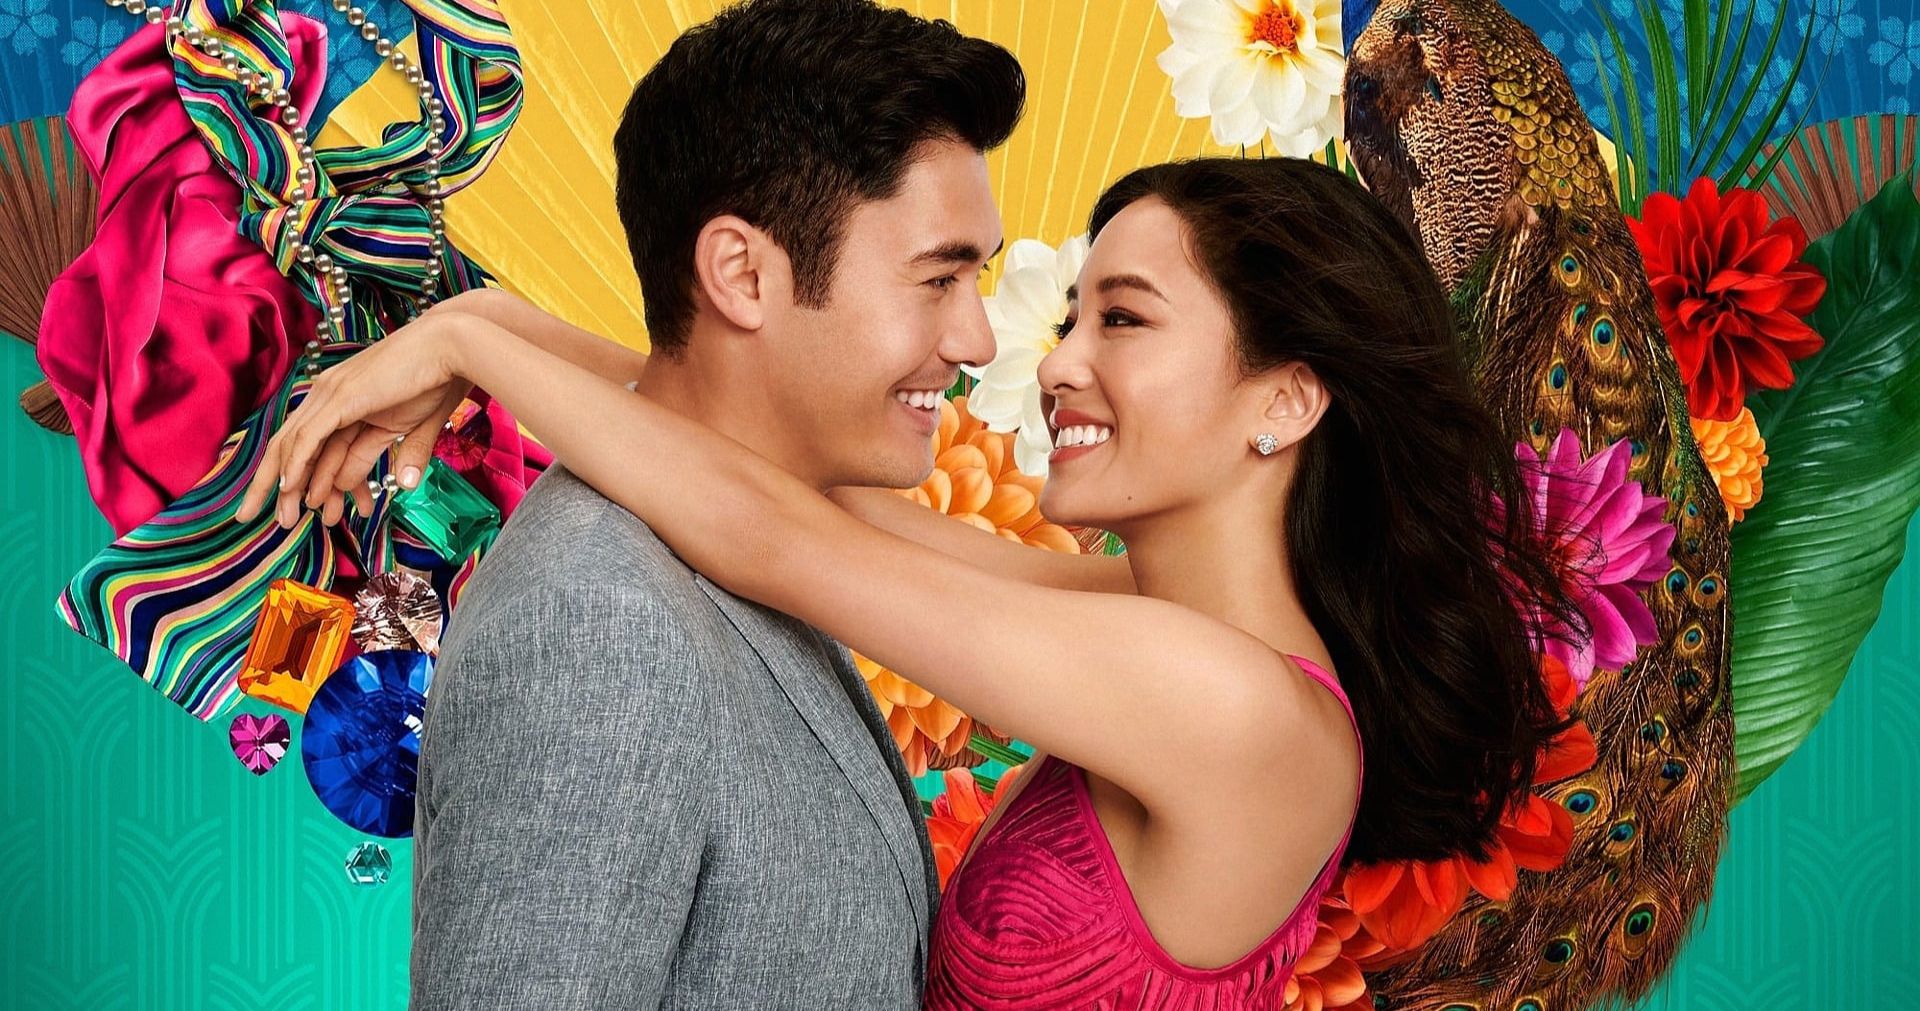 Crazy Rich Asians 2 Casting Scam Leaves Director Jon M. Chu Feeling Disgusted